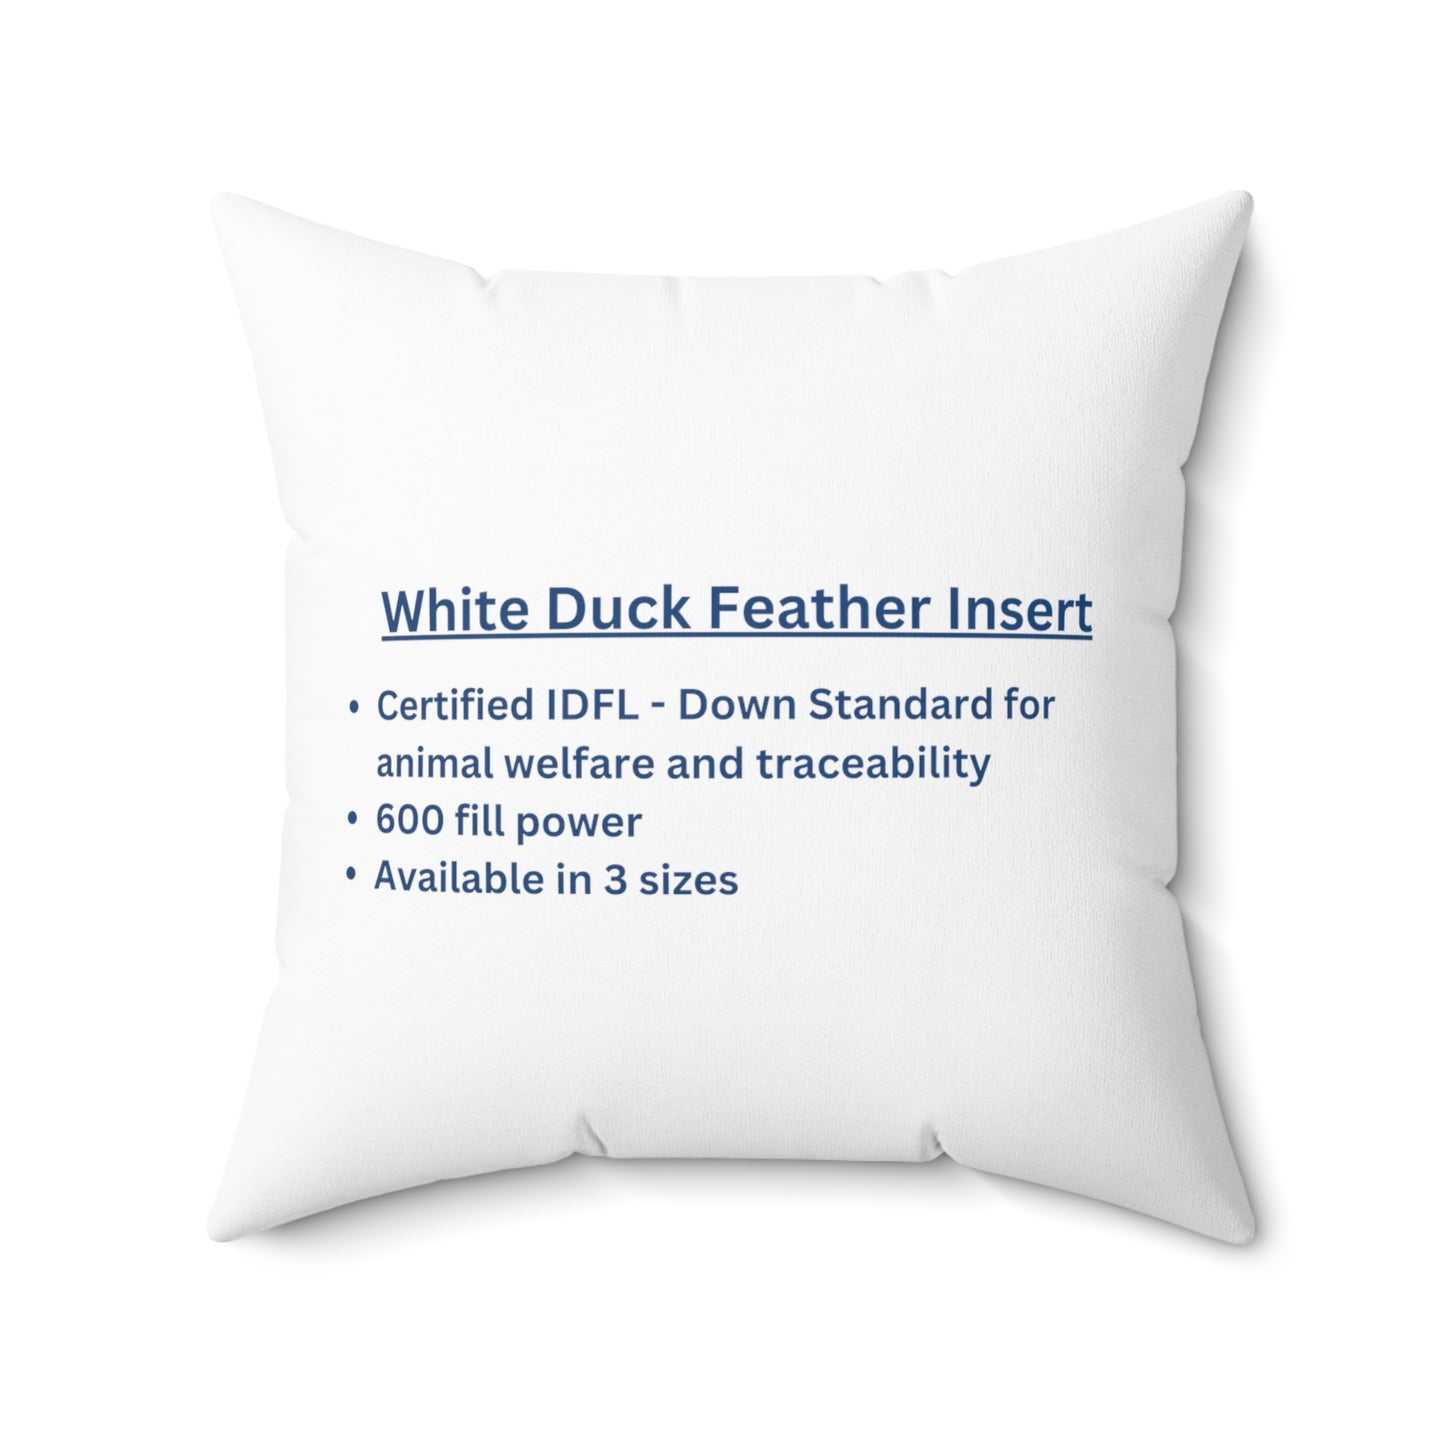 Feather Pillow Insert - available in 3 sizes